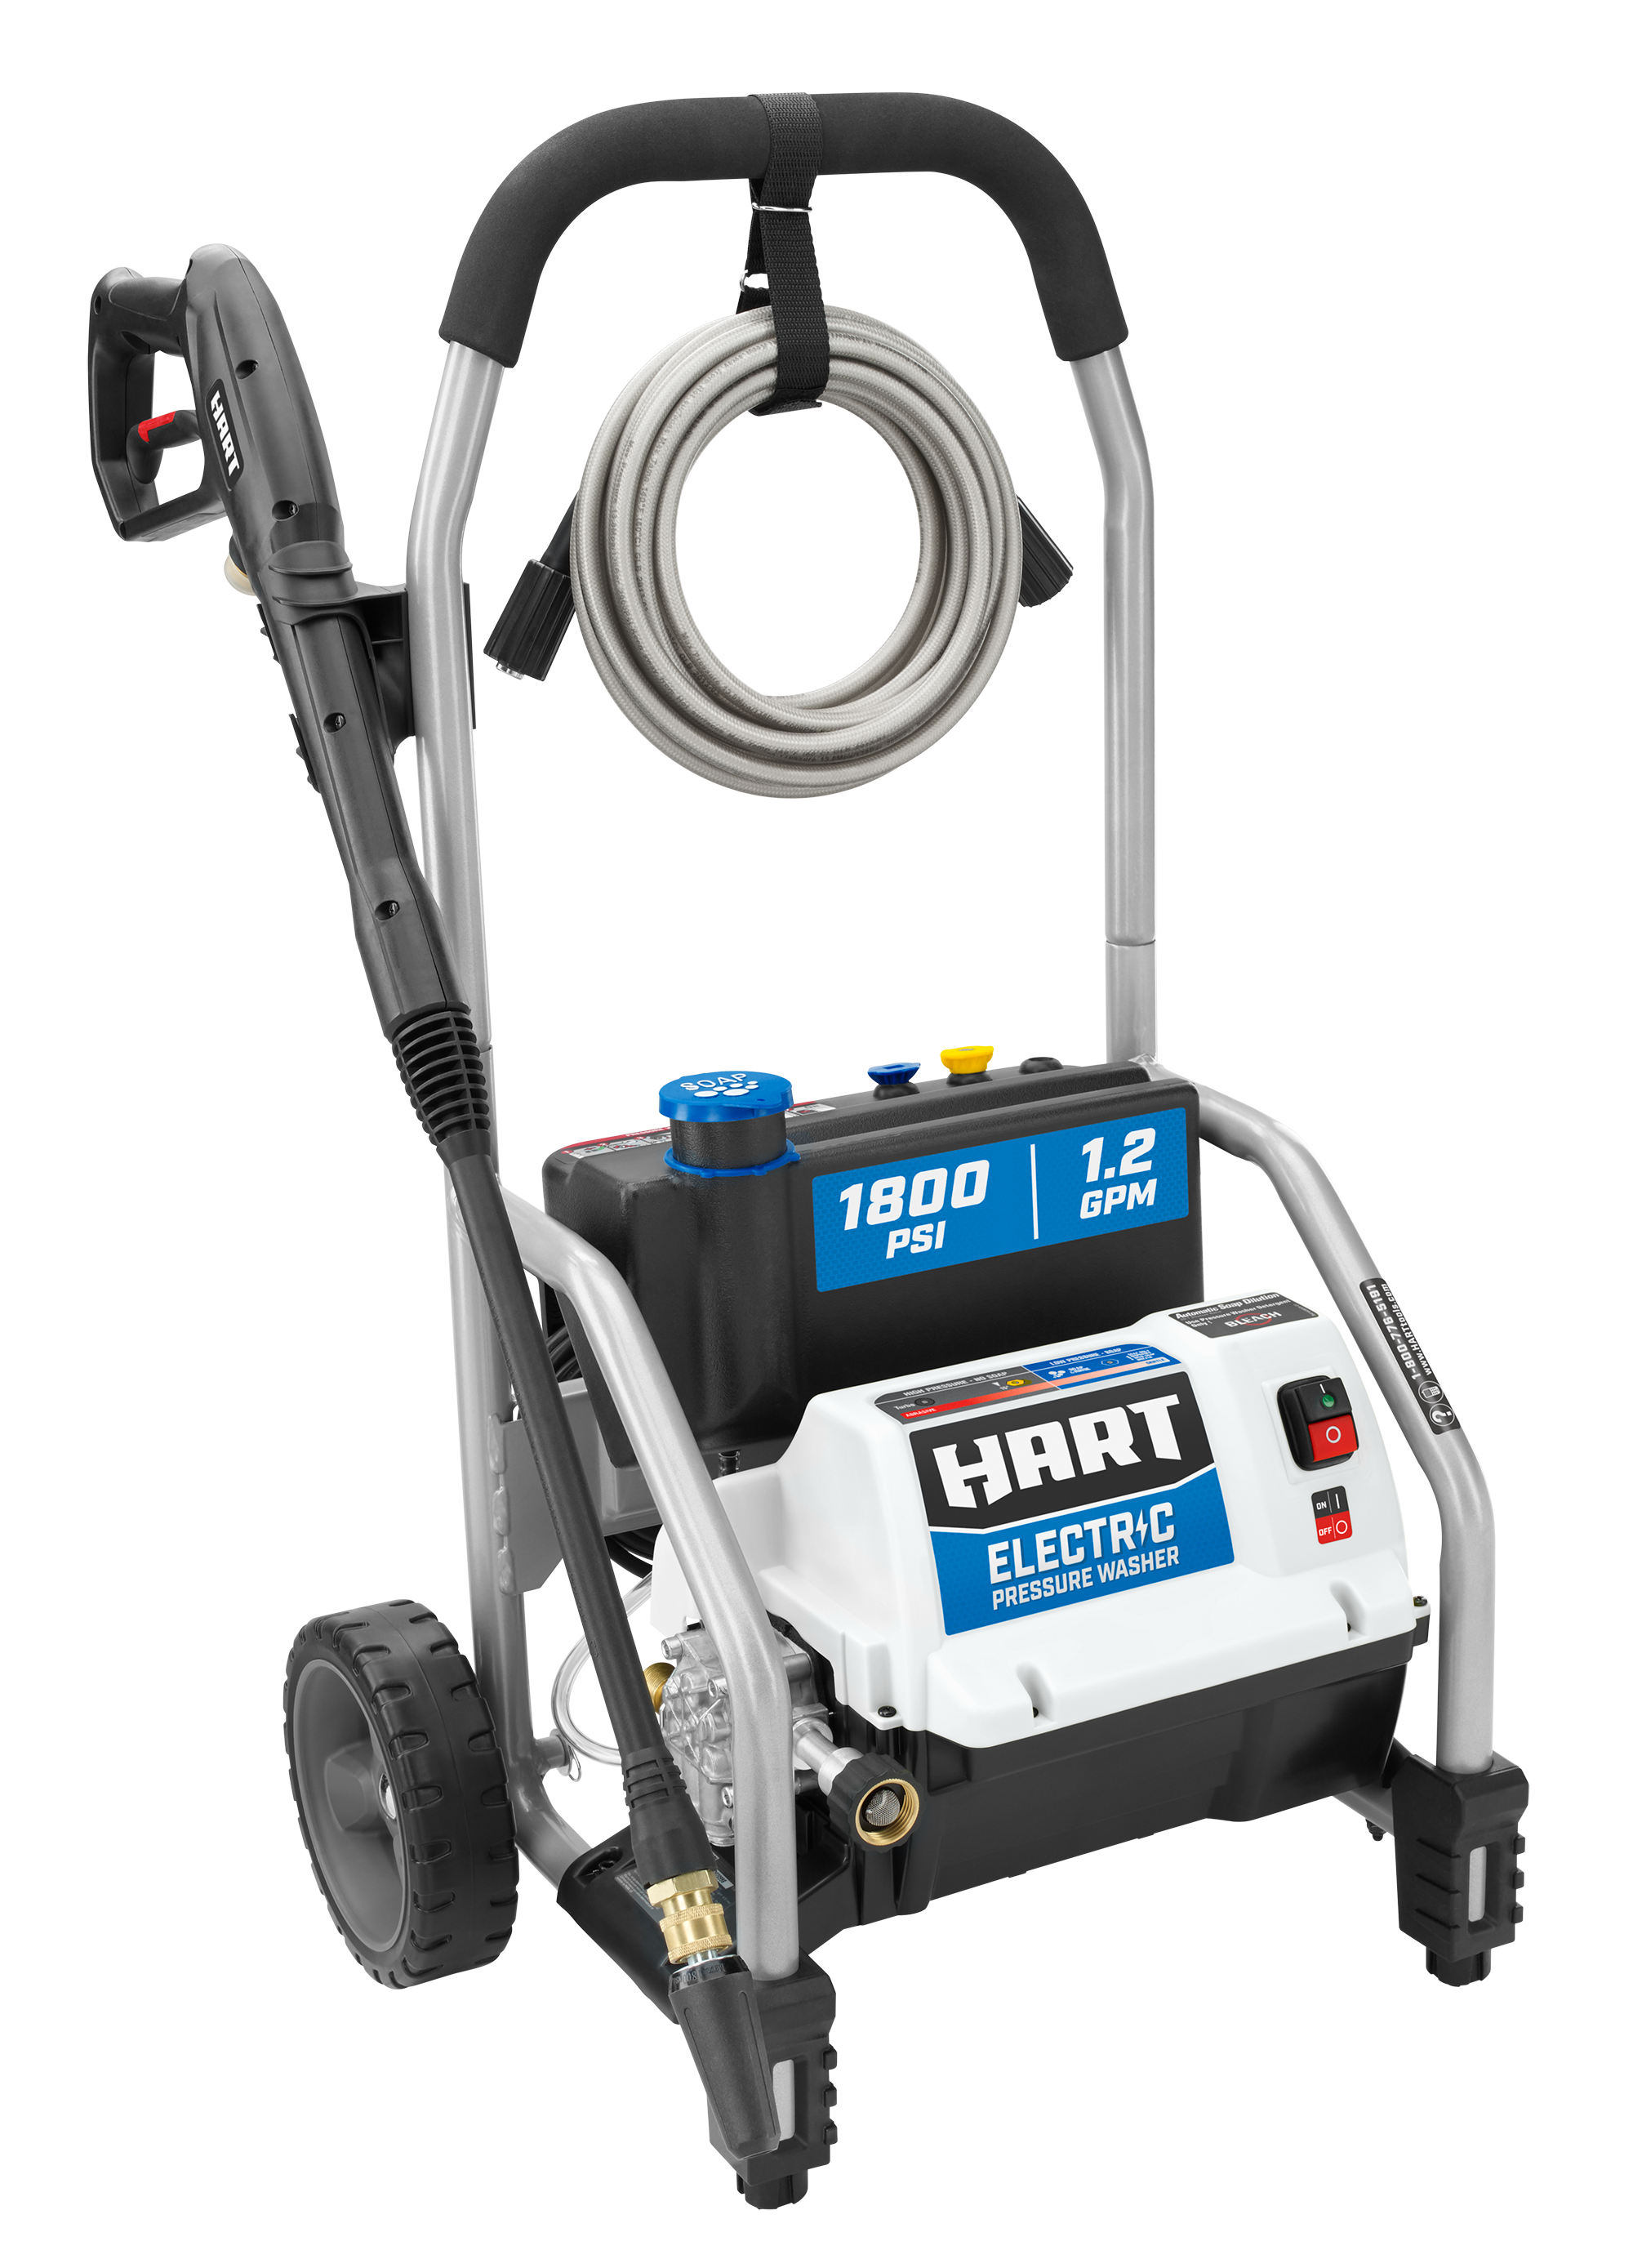 HART 1800 PSI at 1.2 GPM Electric Pressure Washer - image 1 of 10